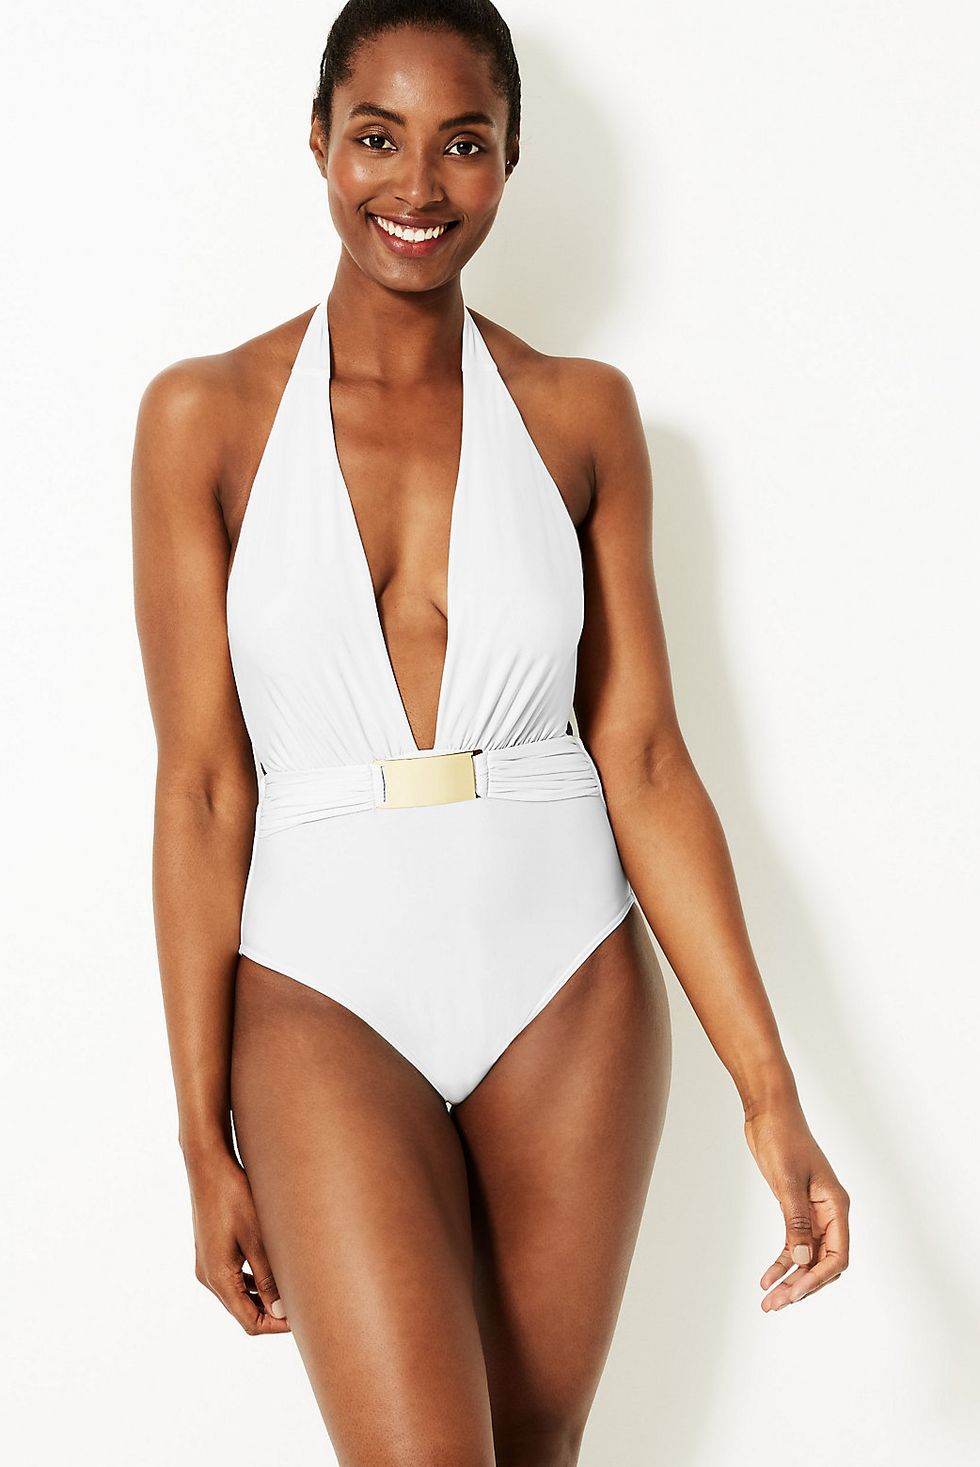 Marks and Spencers' affordable version of cult celeb swimsuit